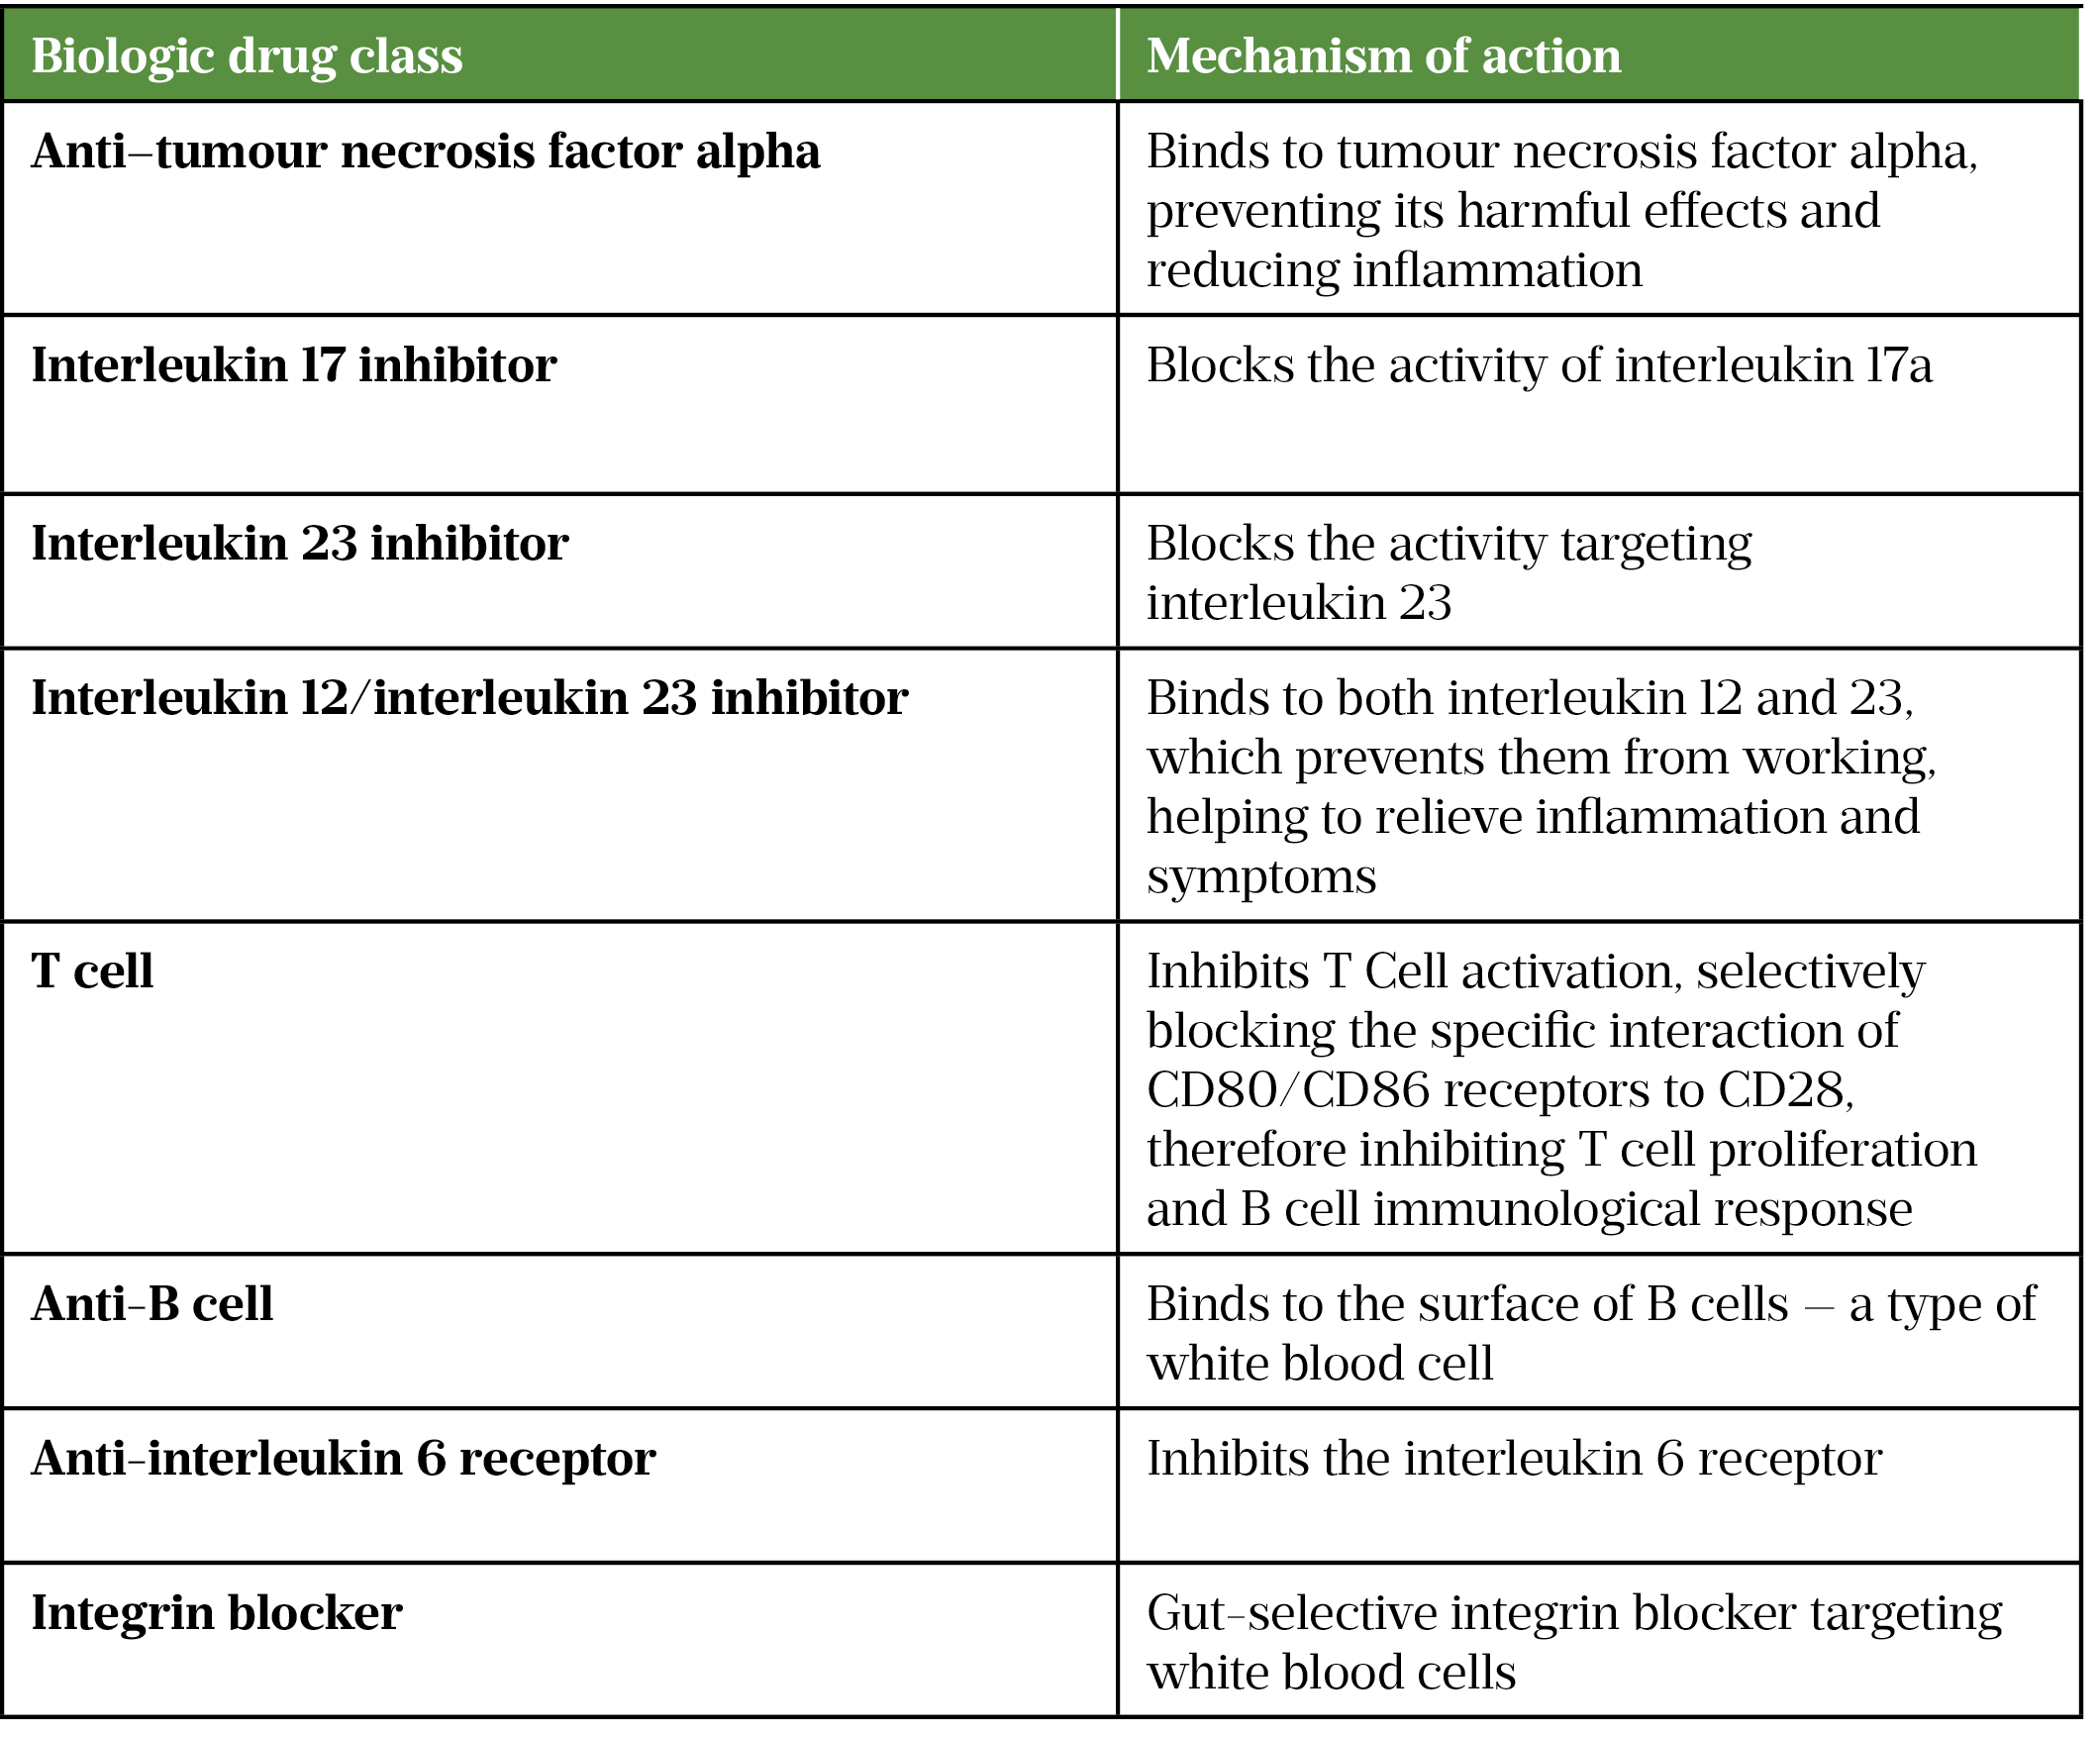 Table 1: Biologic drug classes and their mechanism of action